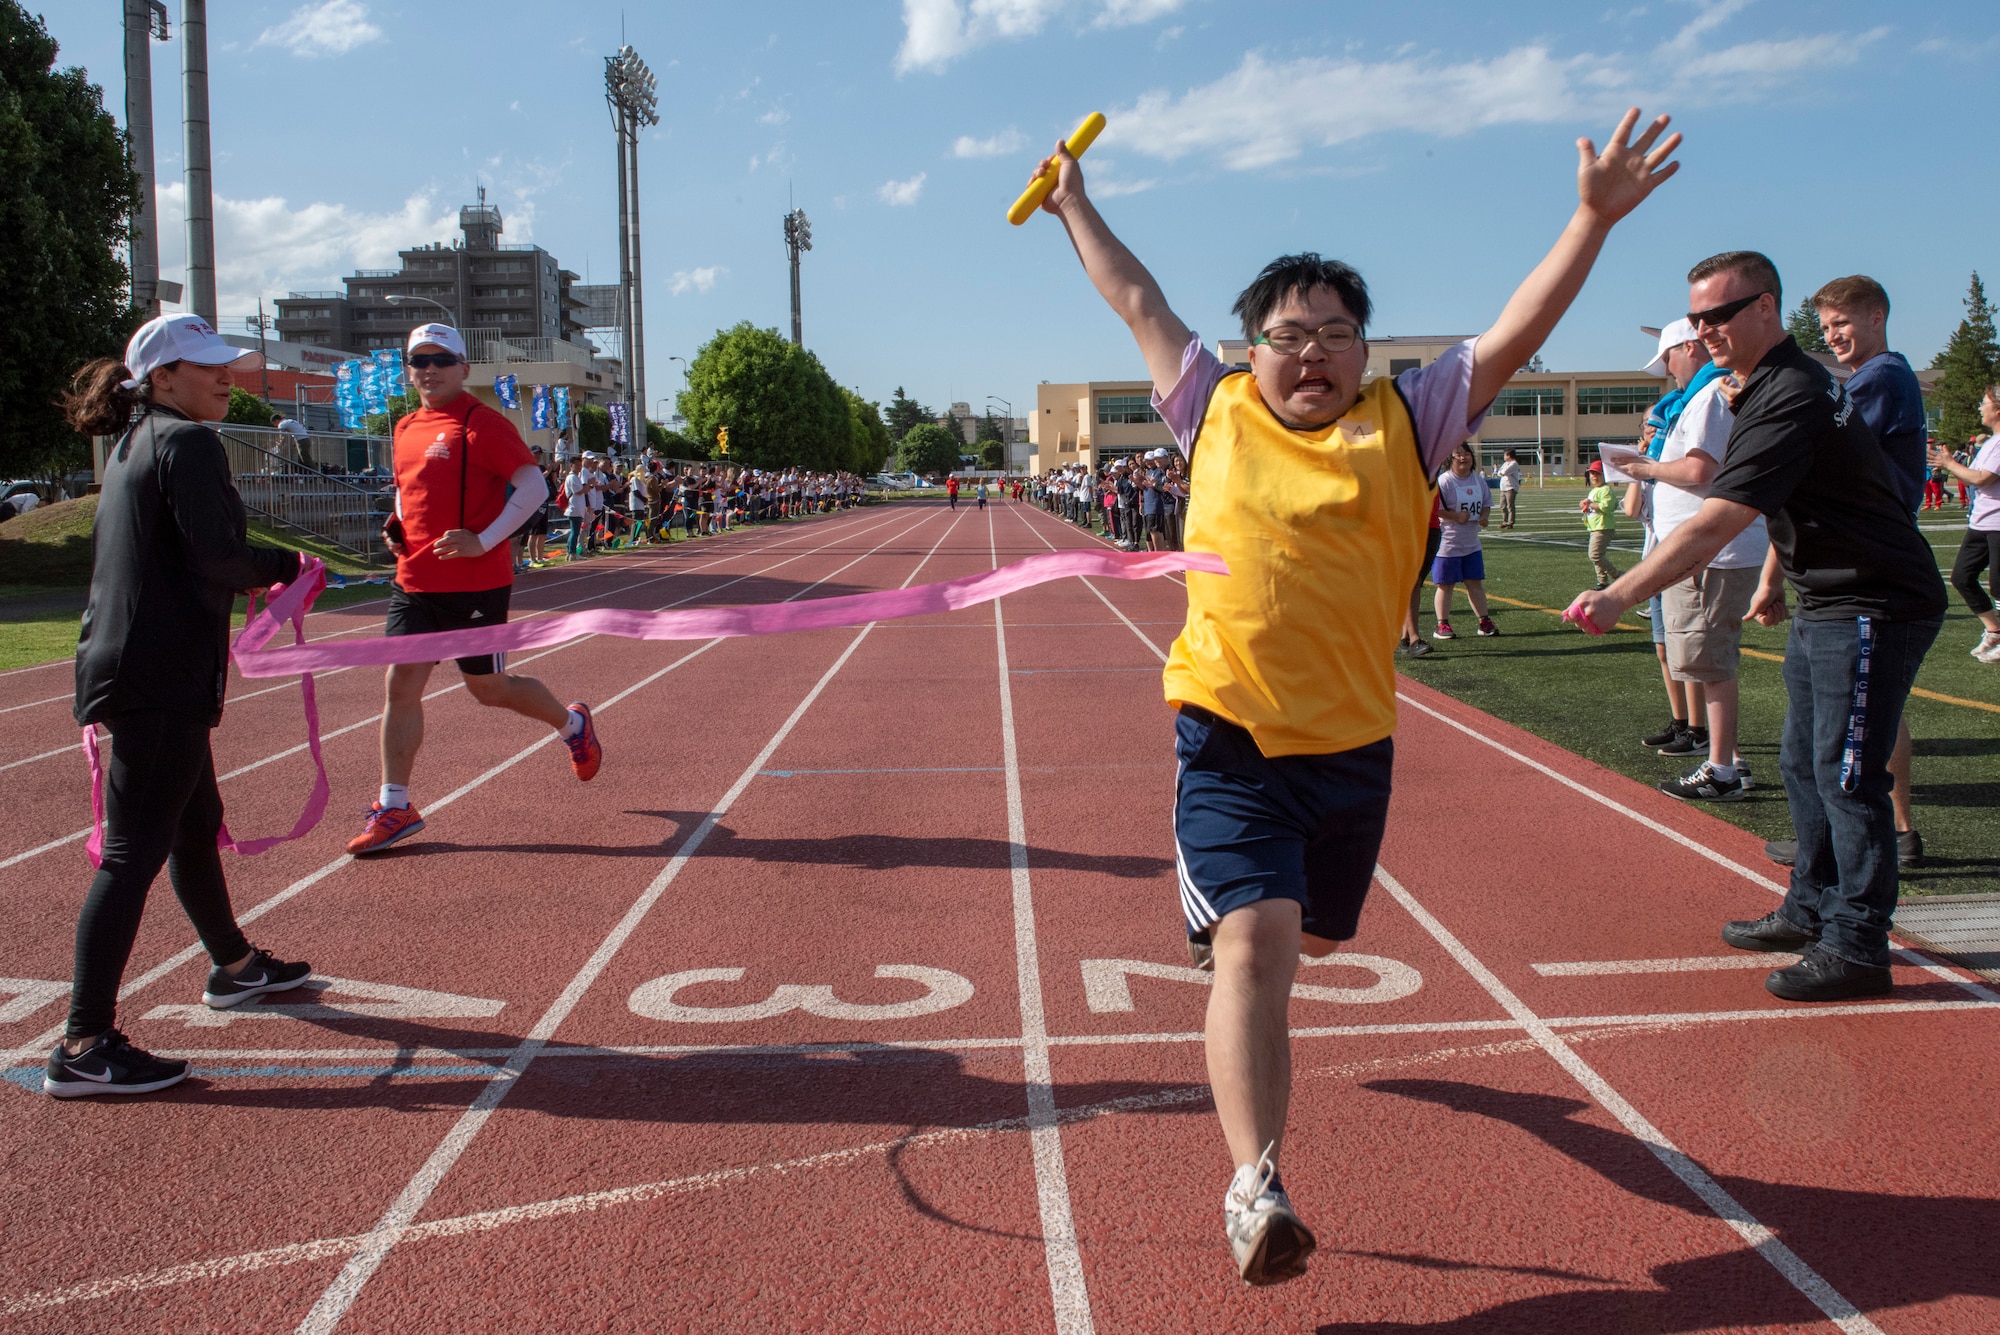 An athlete sprints through the finish line of the 4x100 meter relay race during the Kanto Plains Special Olympics at Yokota Air Base, Japan, May 19, 2018.